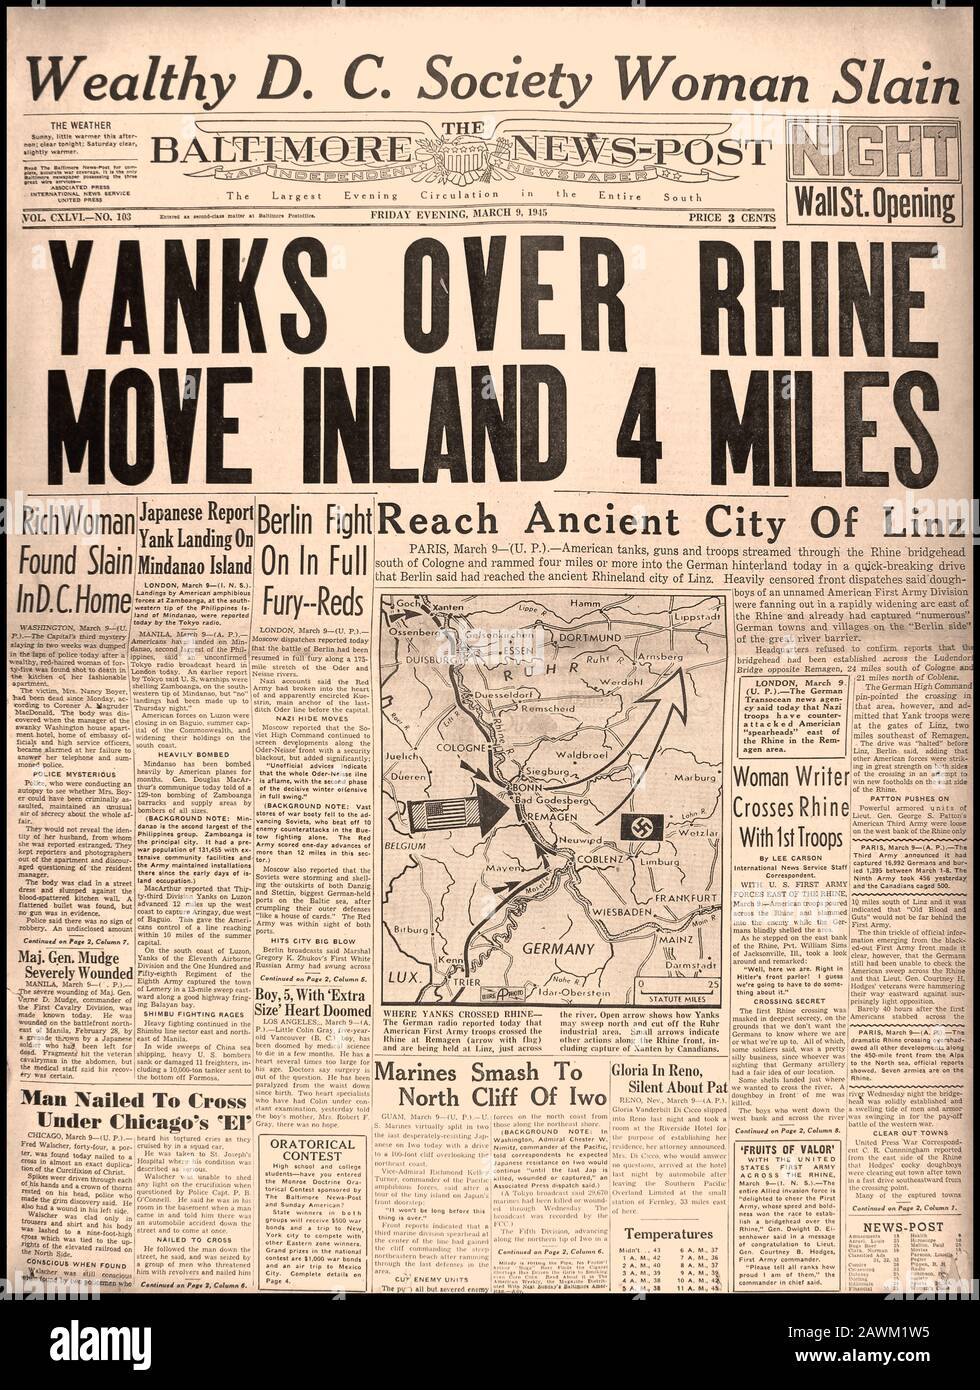 WW2 American Newspaper Headline 'YANKS OVER RHINE MOVE INLAND 4 MILES' The Baltimore Post, March 1945. The beginning of the end..World War II American Military Cross The Rhine with Legendary General Patton and move towards Berlin Nazi Germany Stock Photo